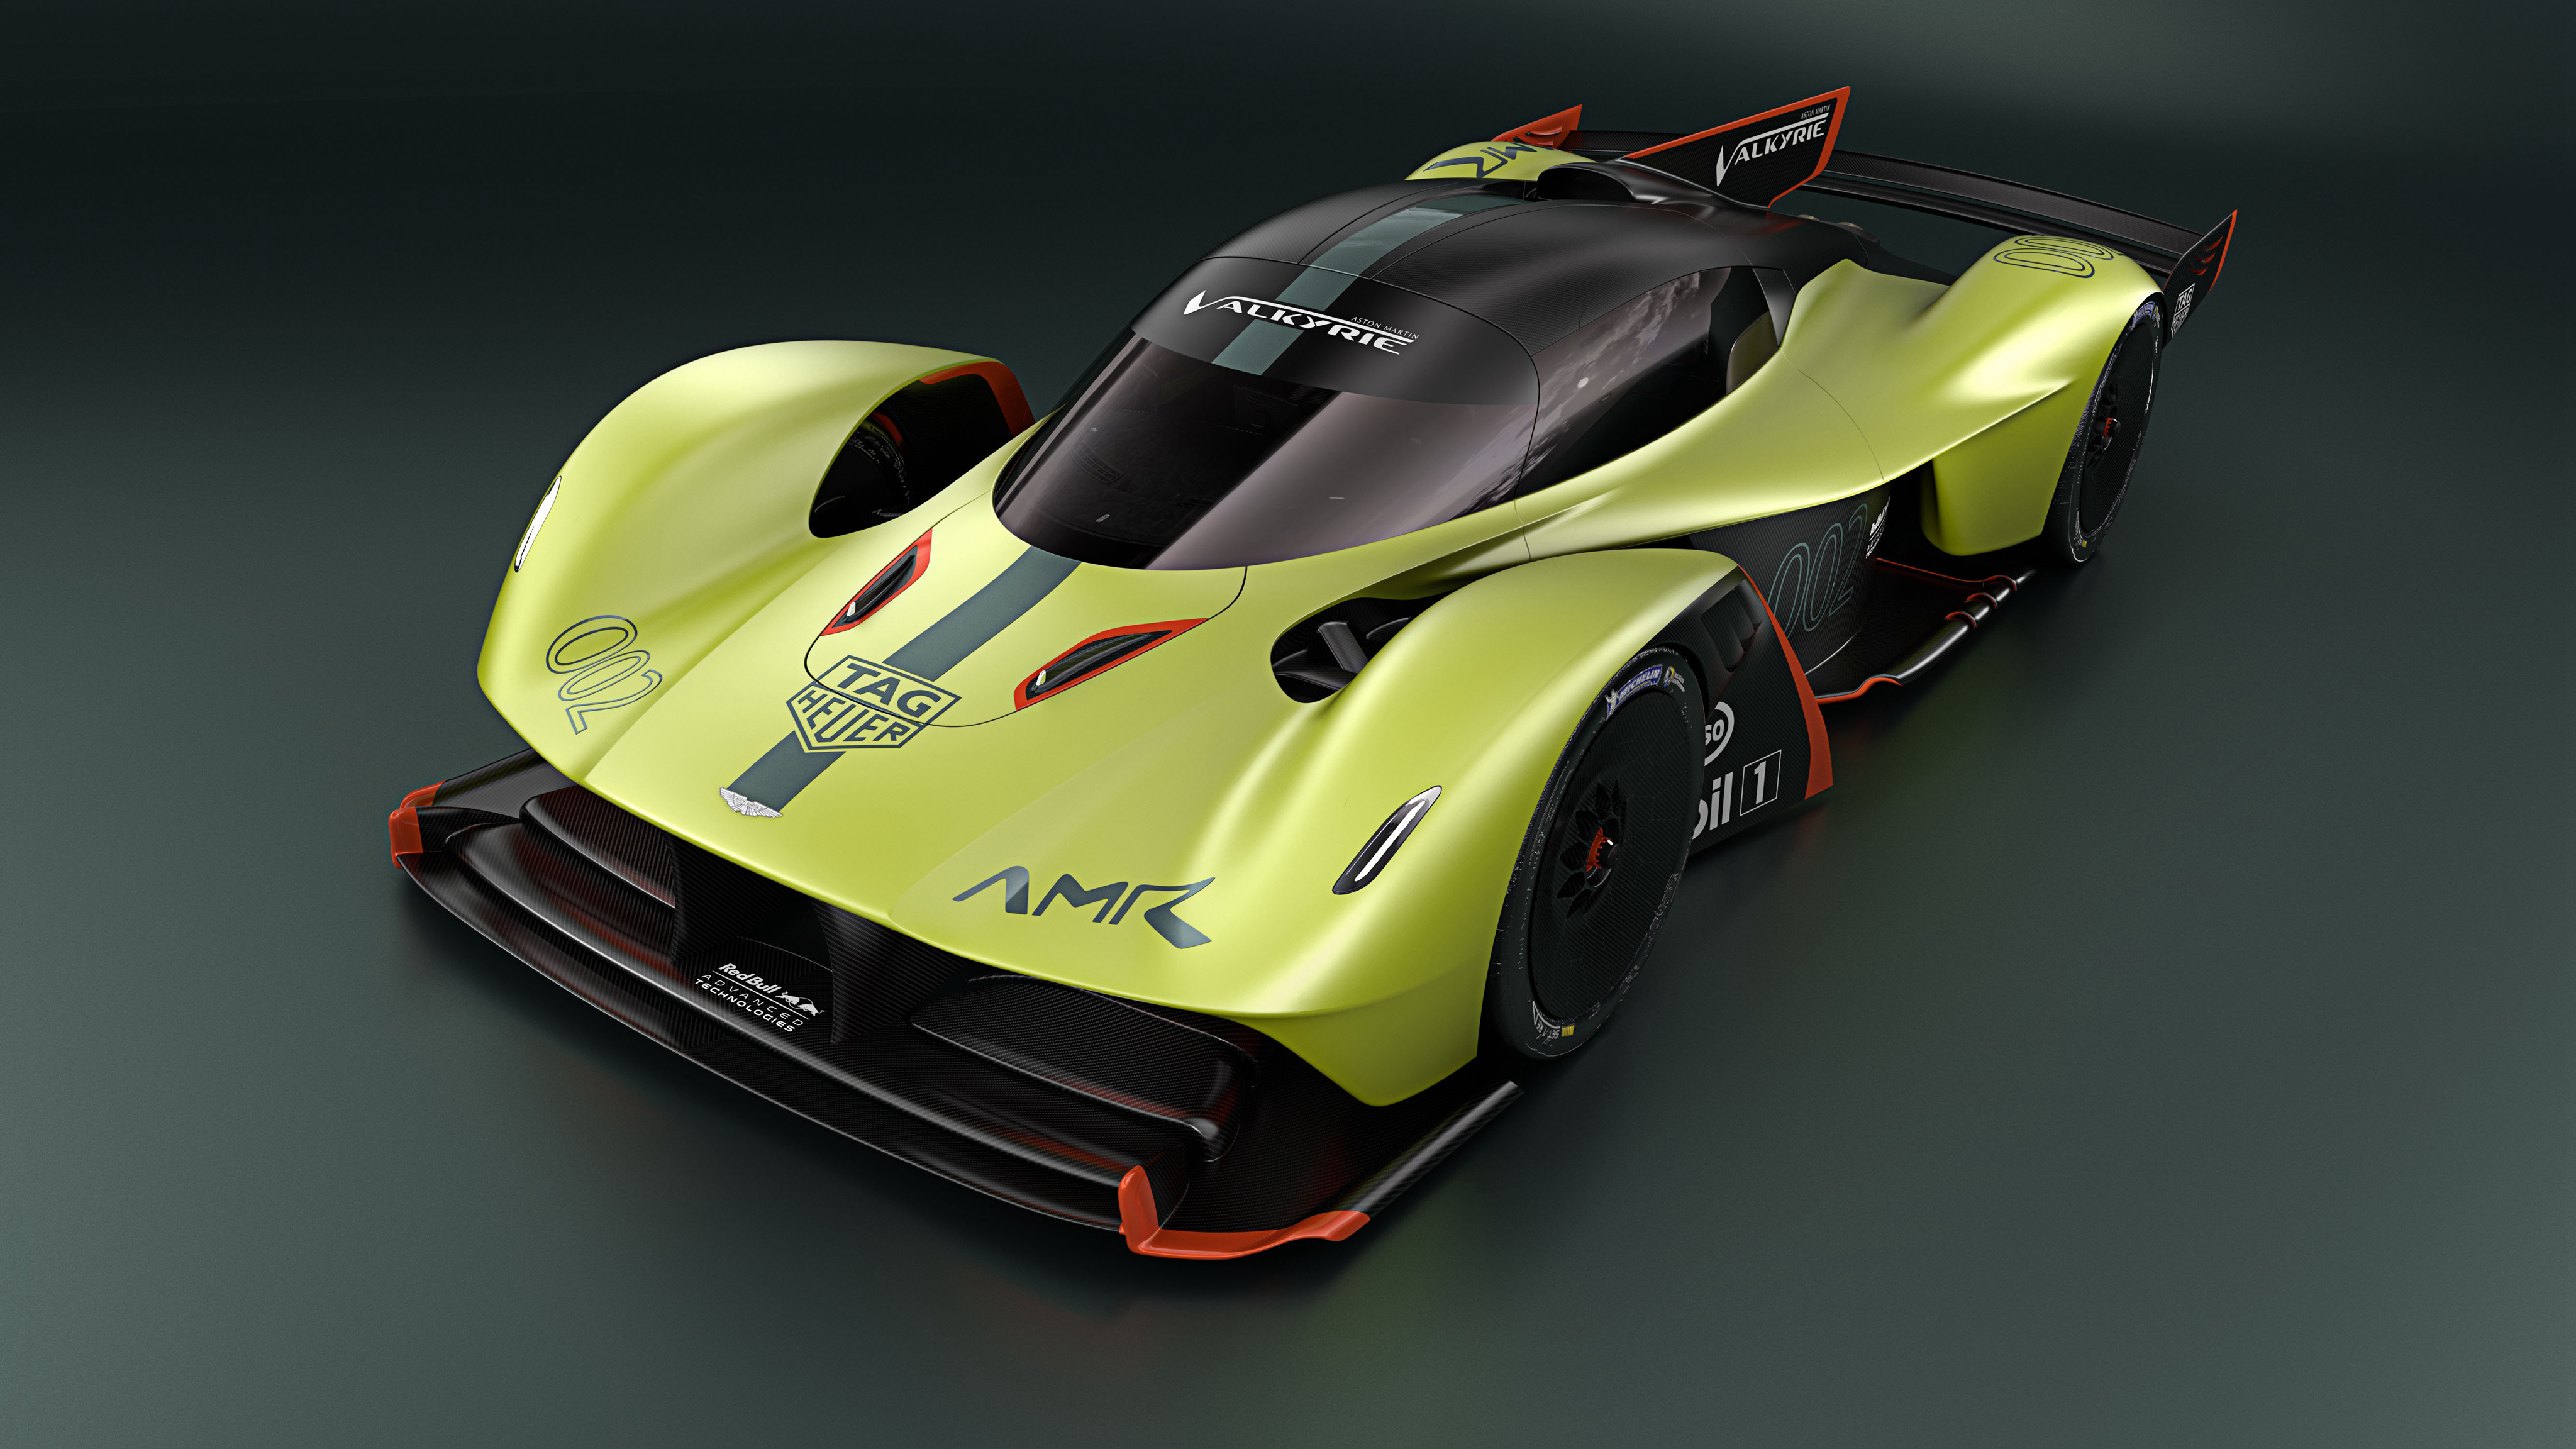 Back To 20 2018 Aston Martin Vulcan Amr Pro Wallpapers - Aston Martin Valkyrie Wallpaper Hd , HD Wallpaper & Backgrounds